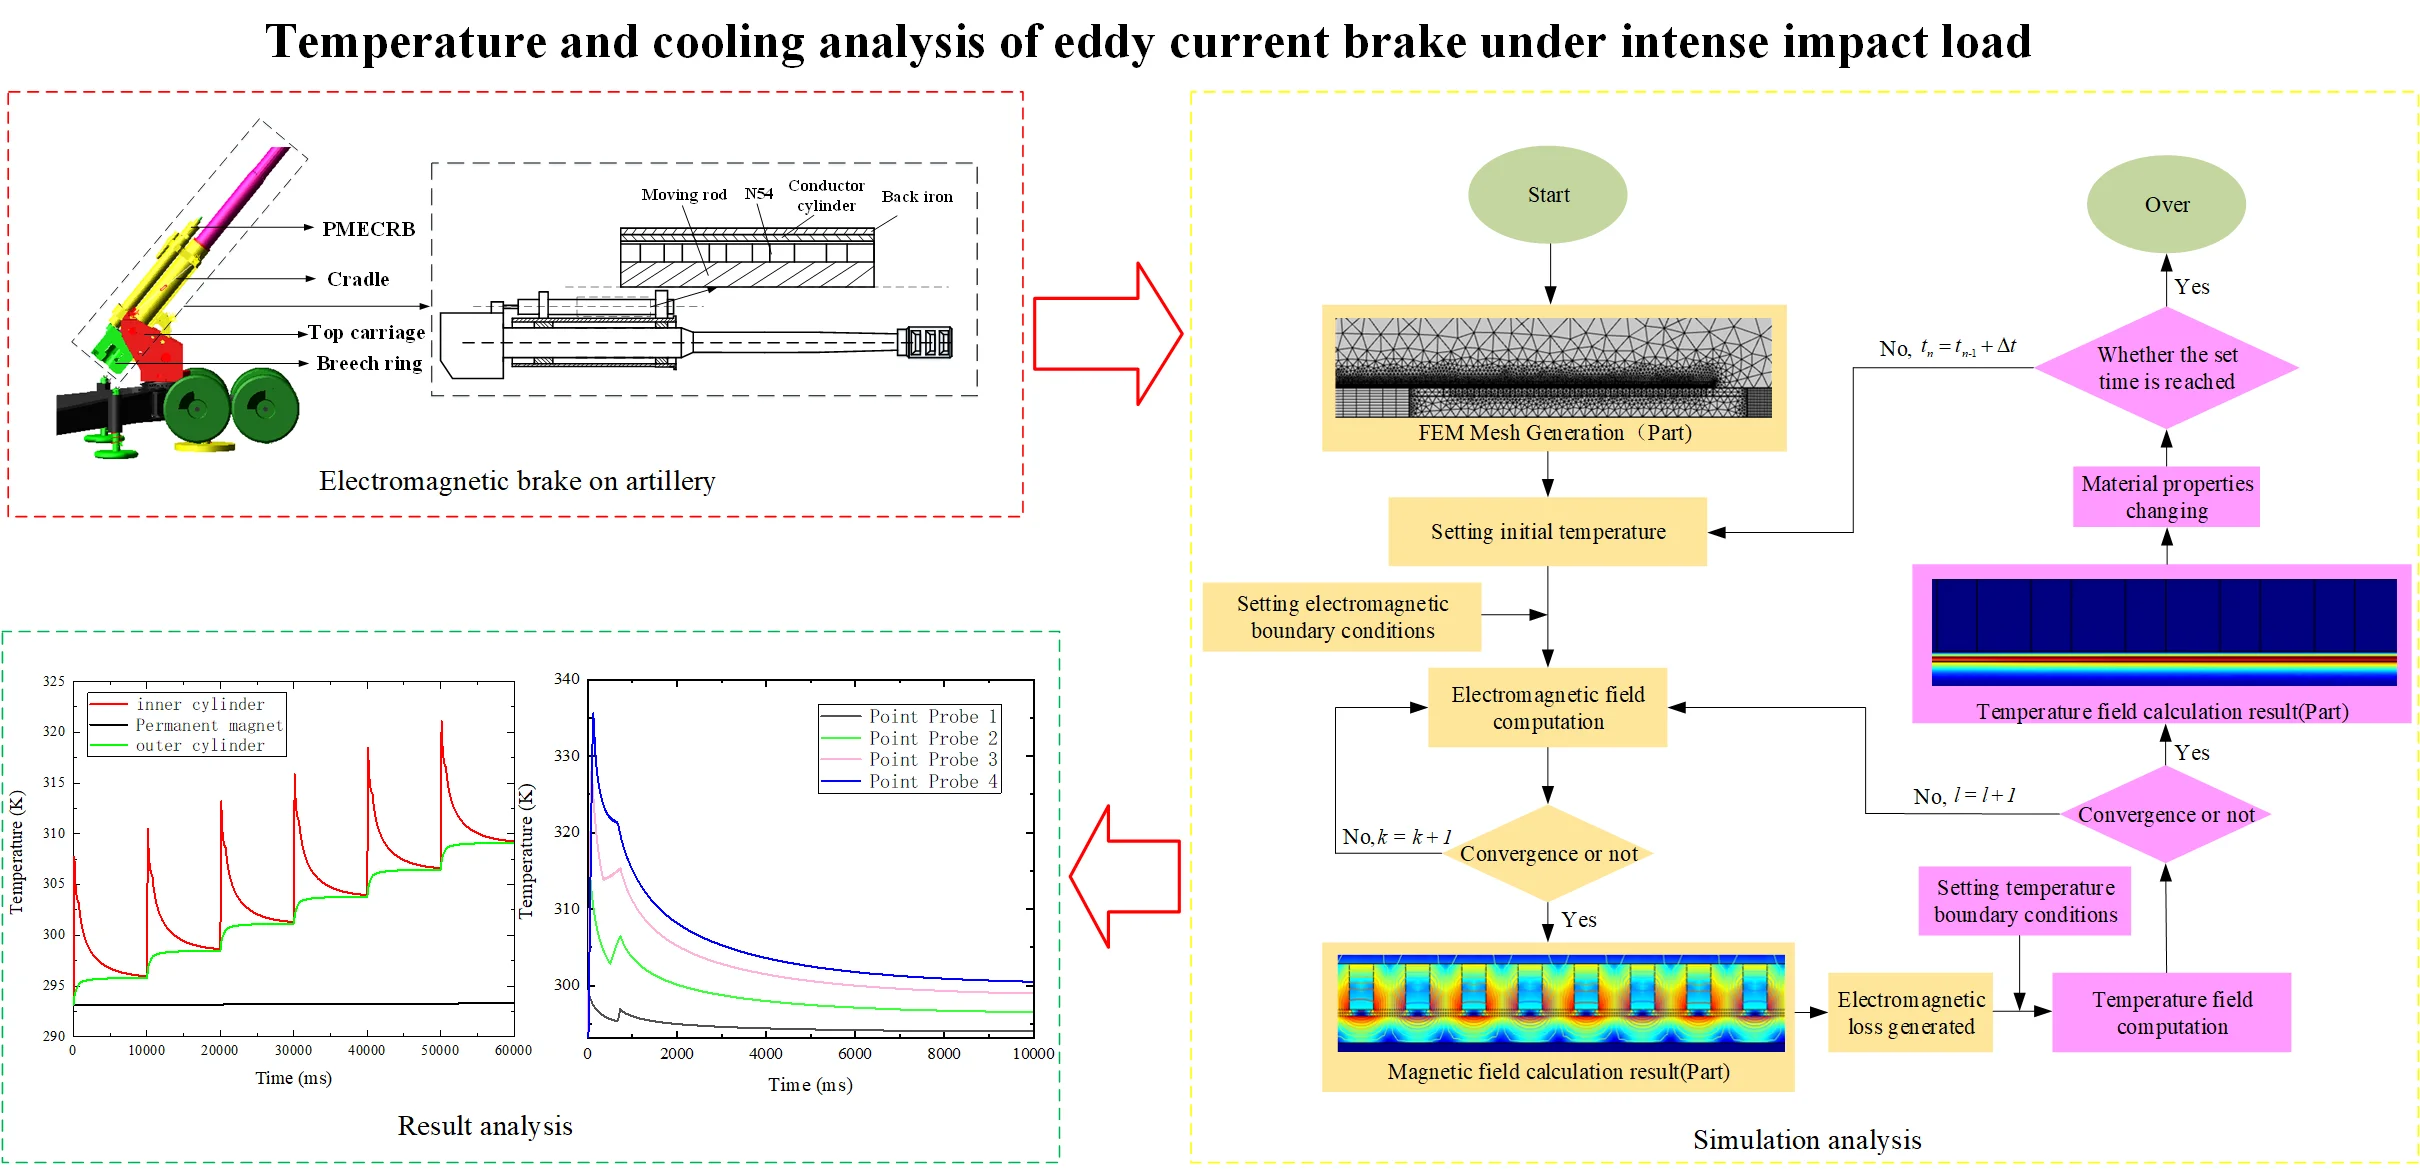 Temperature and cooling analysis of eddy current brake under intense impact load